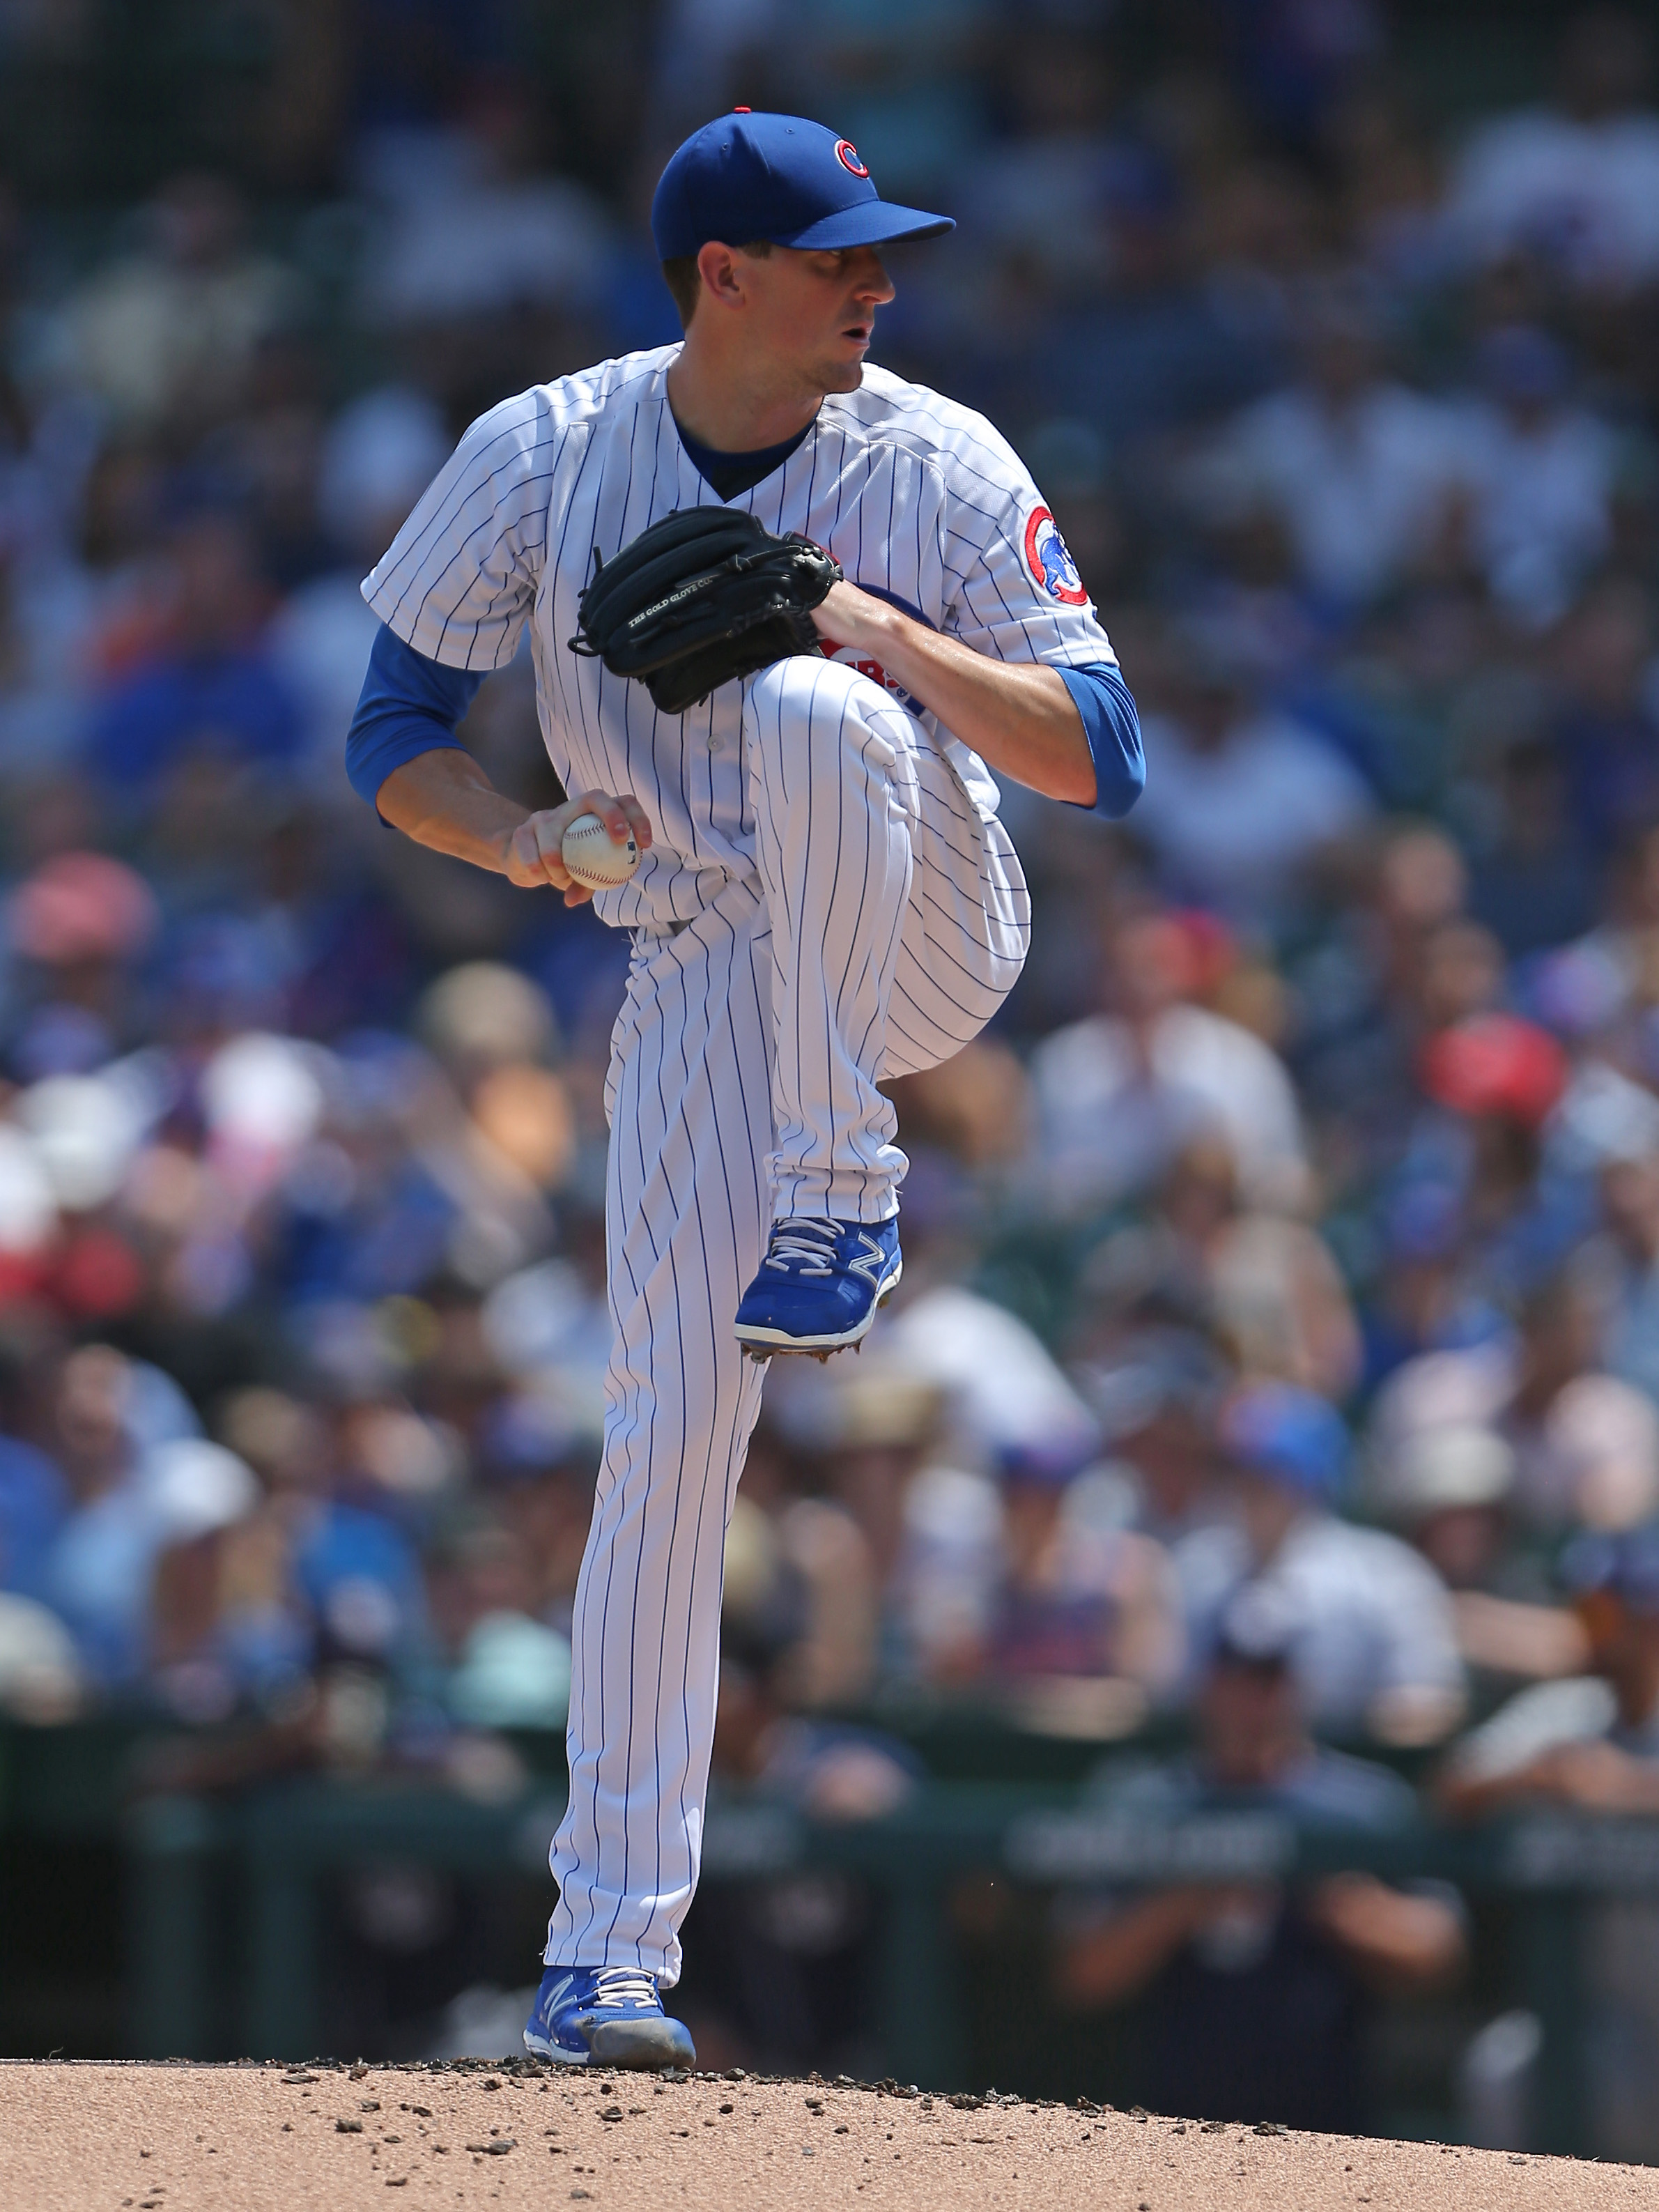 Kyle Hendricks and wife announce they are expecting their first